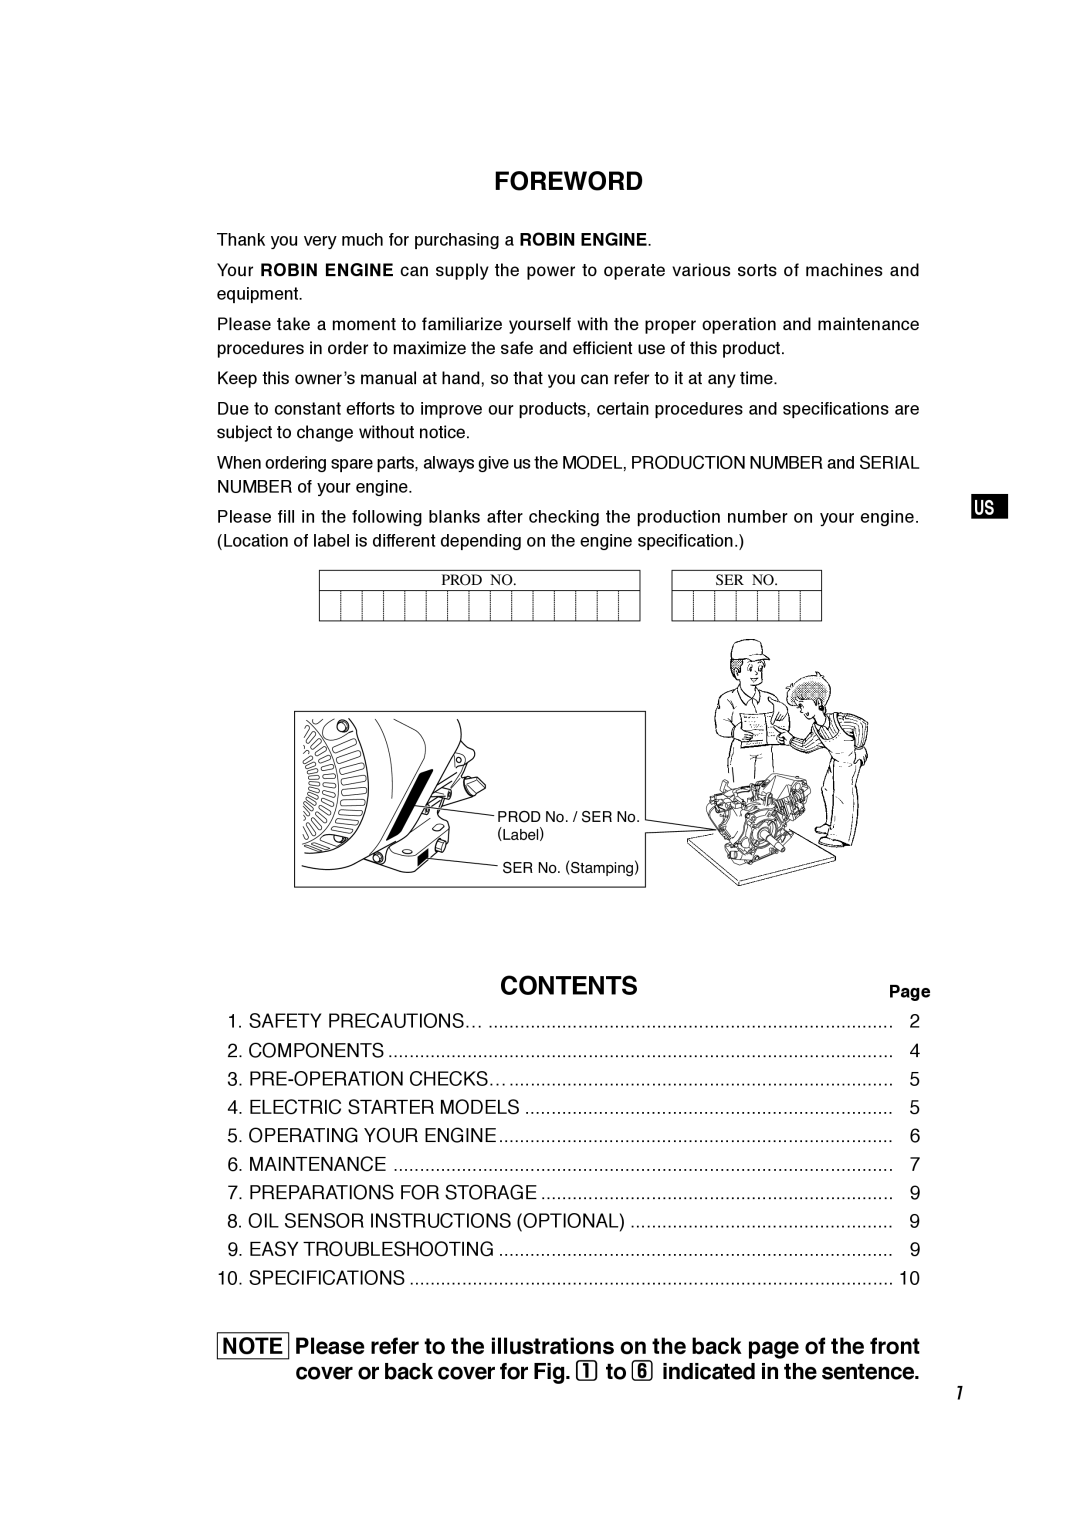 Subaru Robin Power Products EX30 manual Foreword, Contents, Pre-Operation Checks… 